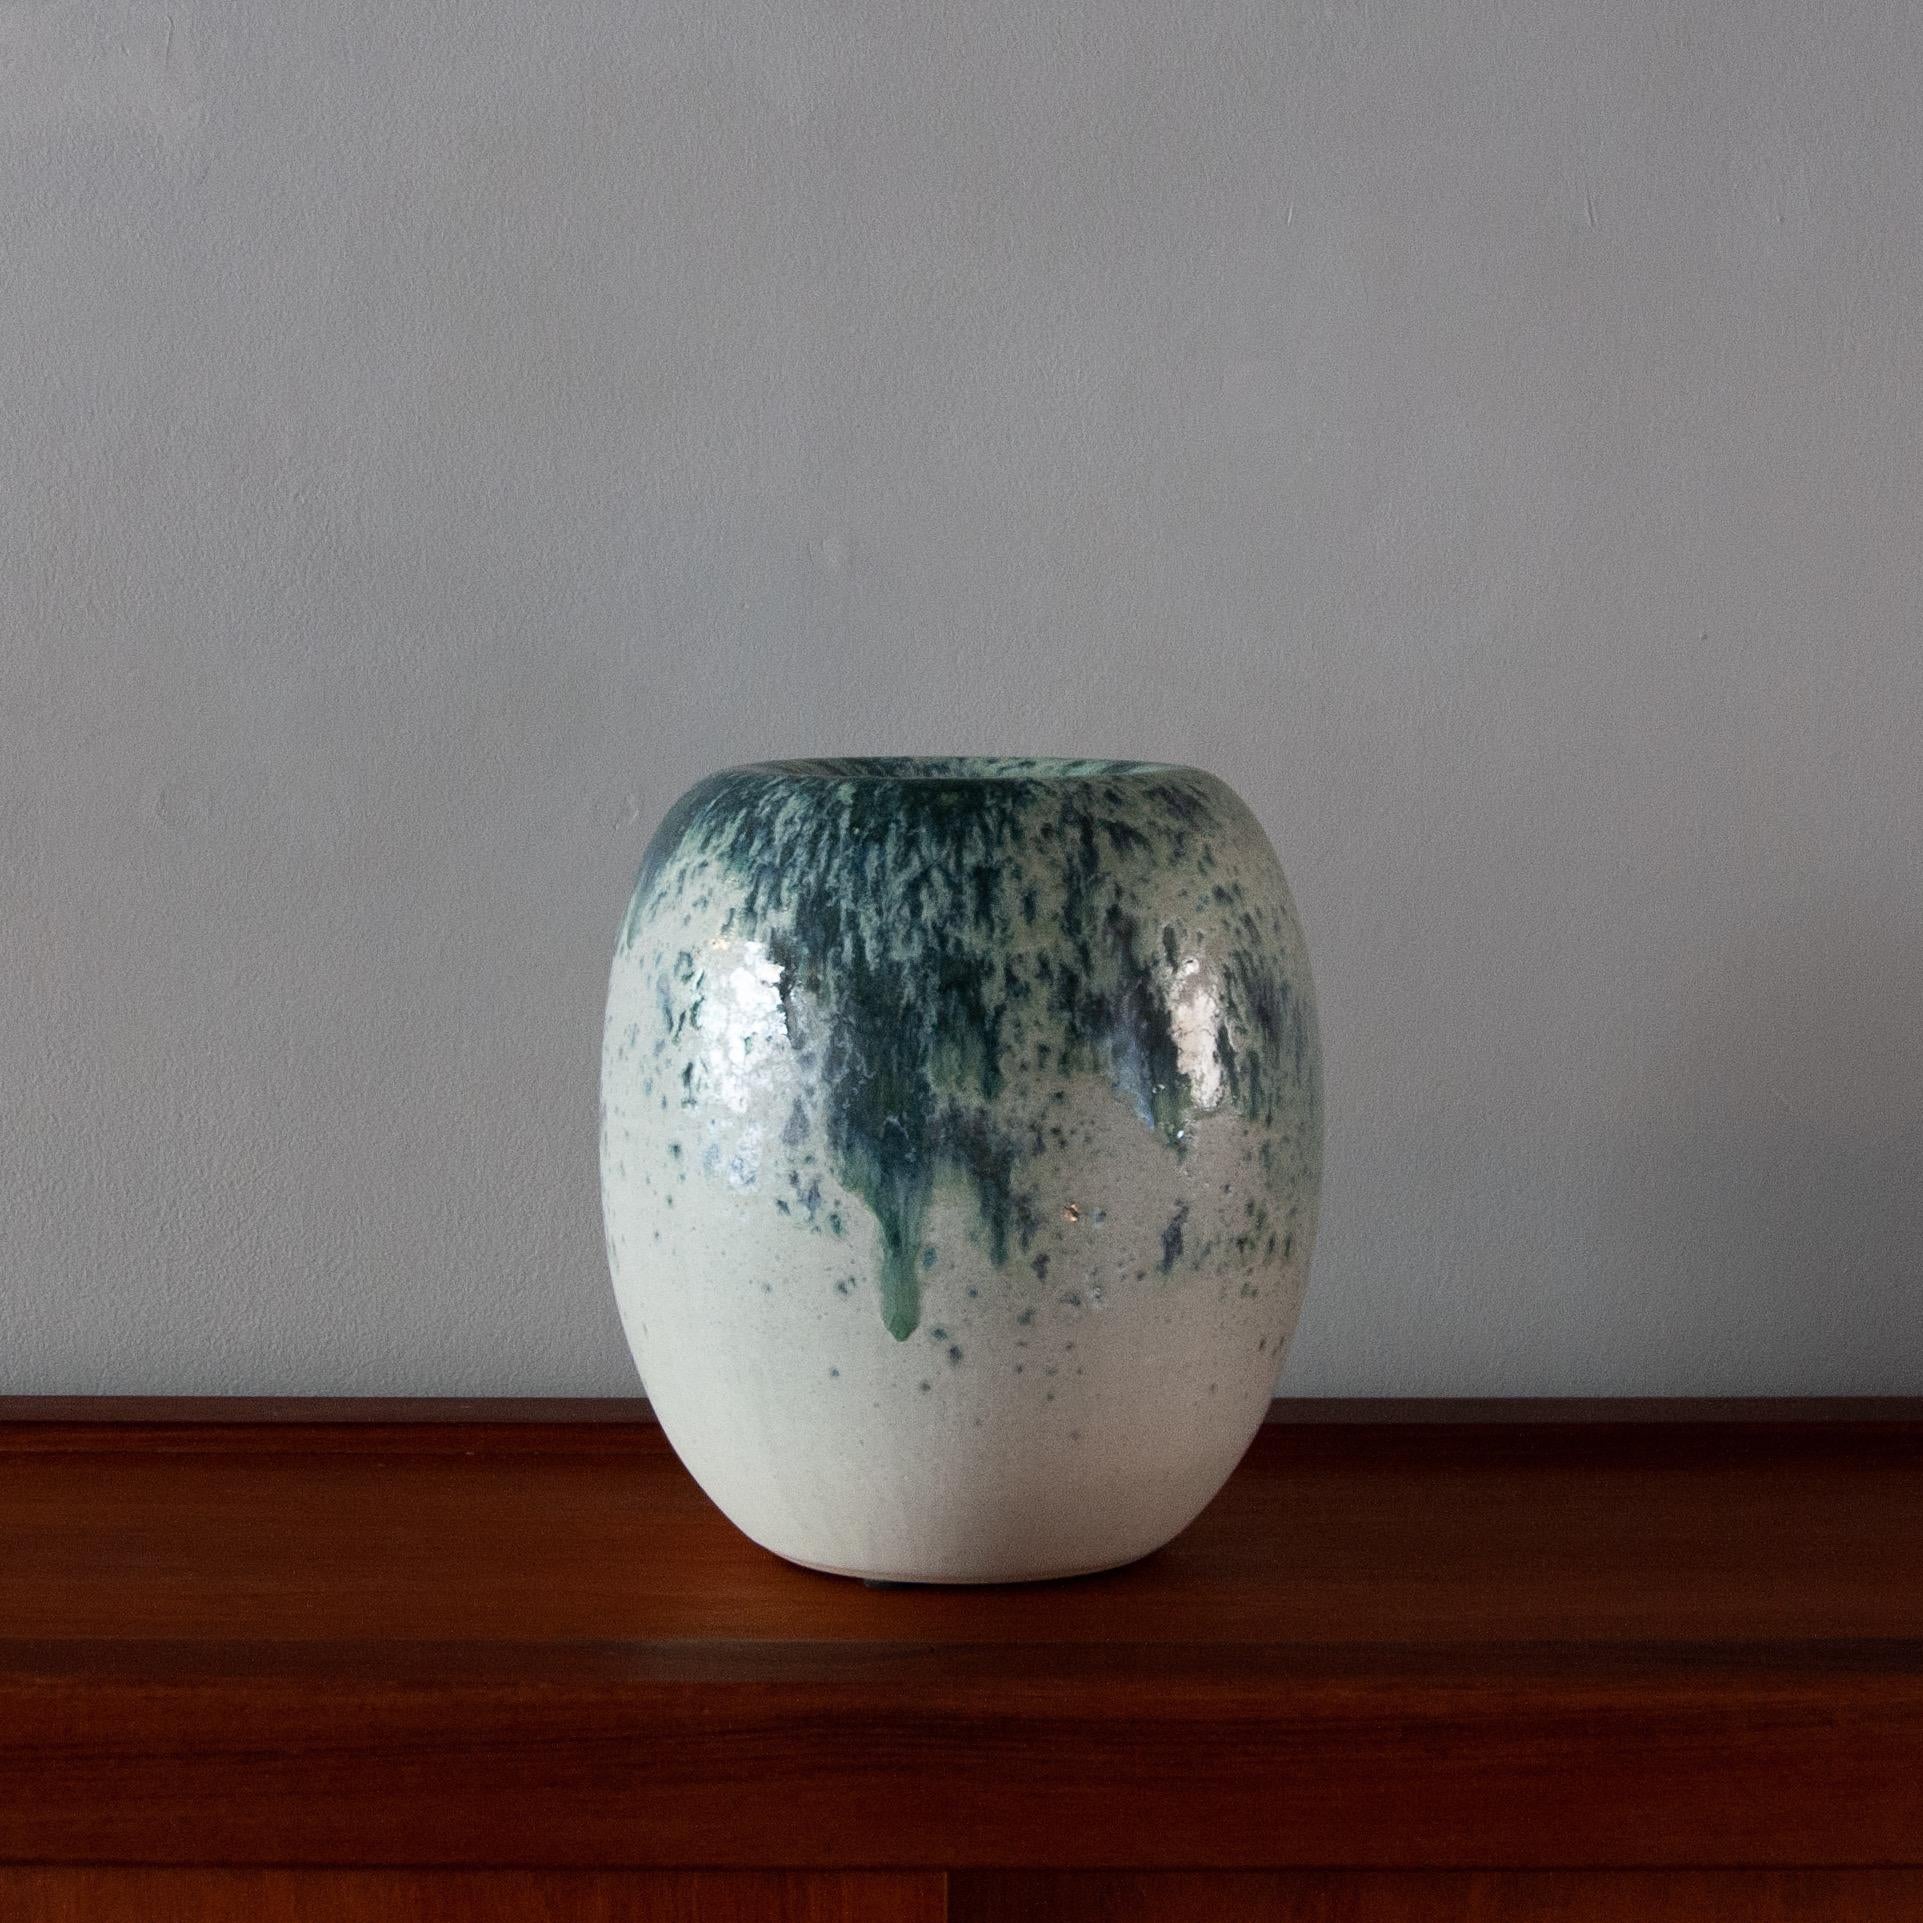 Aage and Kasper Würtz are a father and son team of studio ceramicists based near Horsens in eastern Jutland, Denmark.
Known internationally for their hand-thrown and hand-glazed ceramics they have produced bespoke collections for distinguished fine